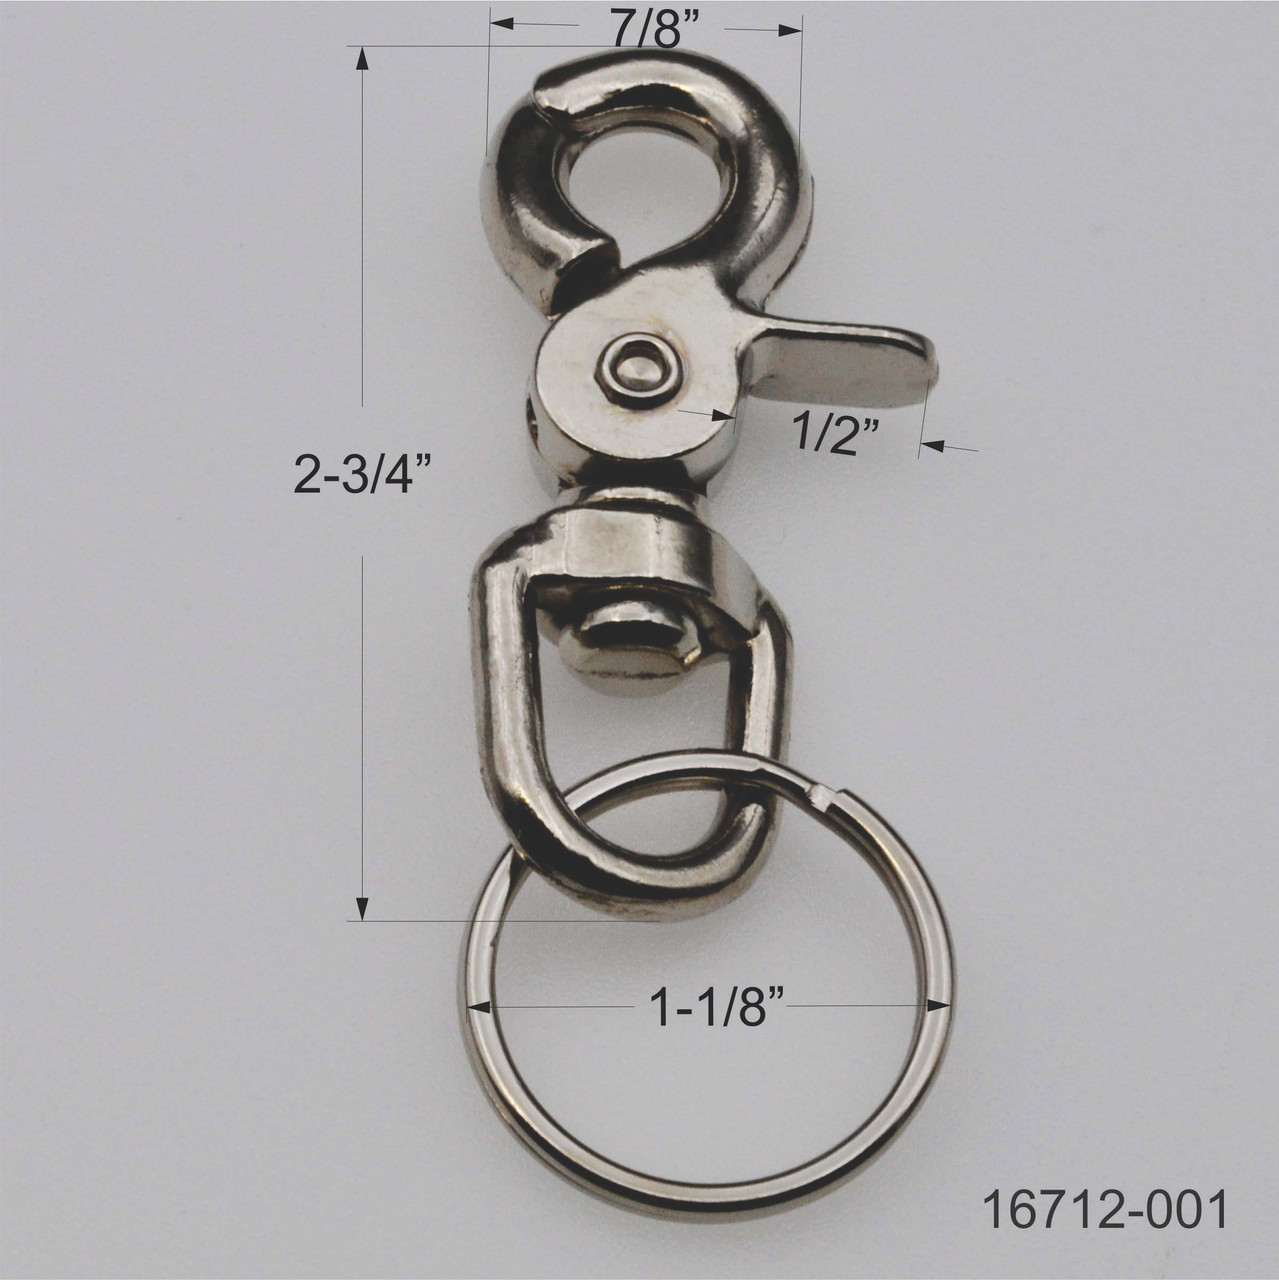 Keychain Plastic Bolt Snap Hooks with Key Rings 